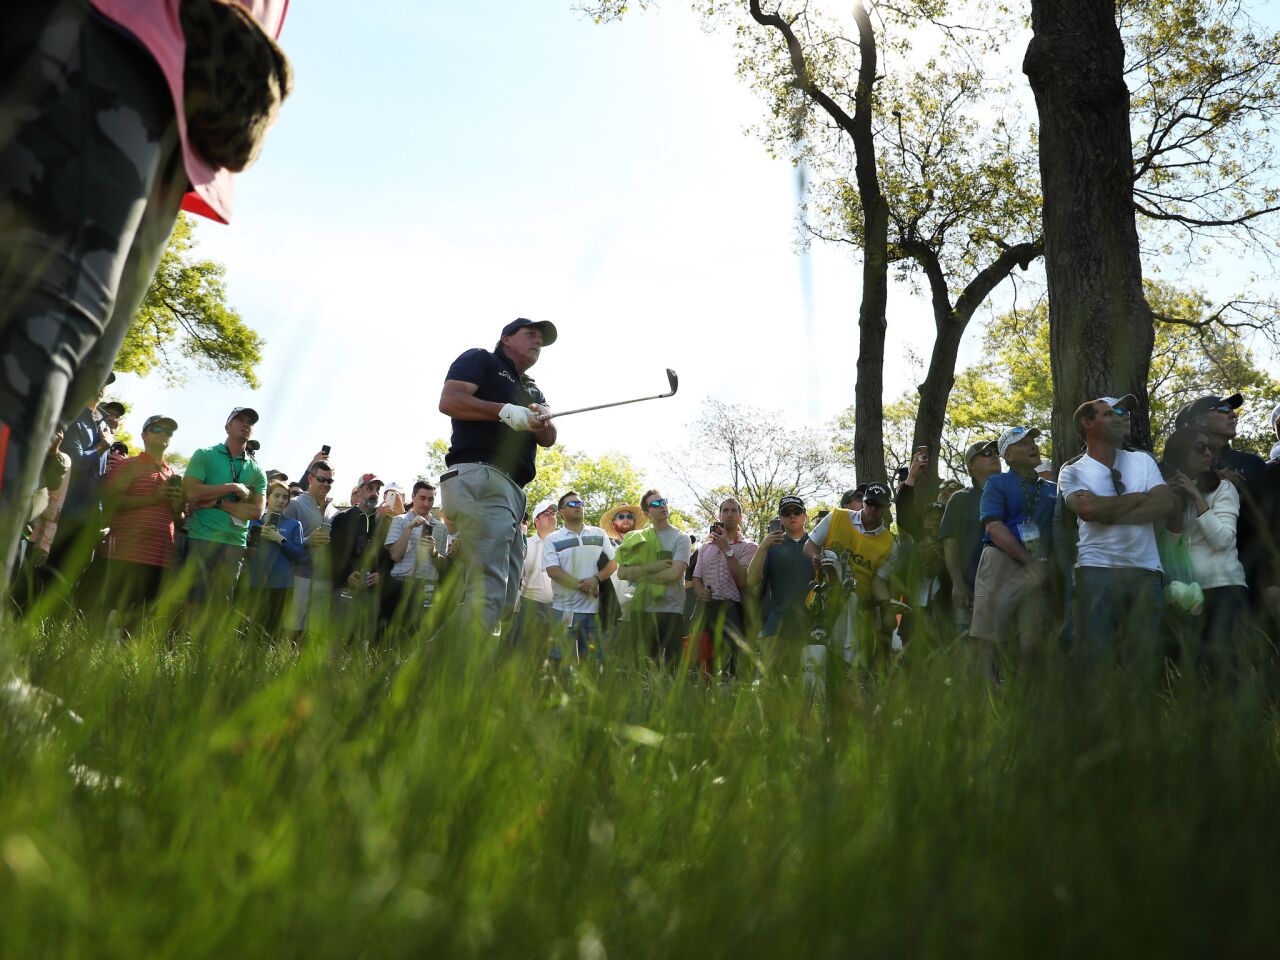 Phil Mickelson of the United States plays his shot on the tenth hole during the second round of the 2019 PGA Championship at the Bethpage Black course in Farmingdale, New York.